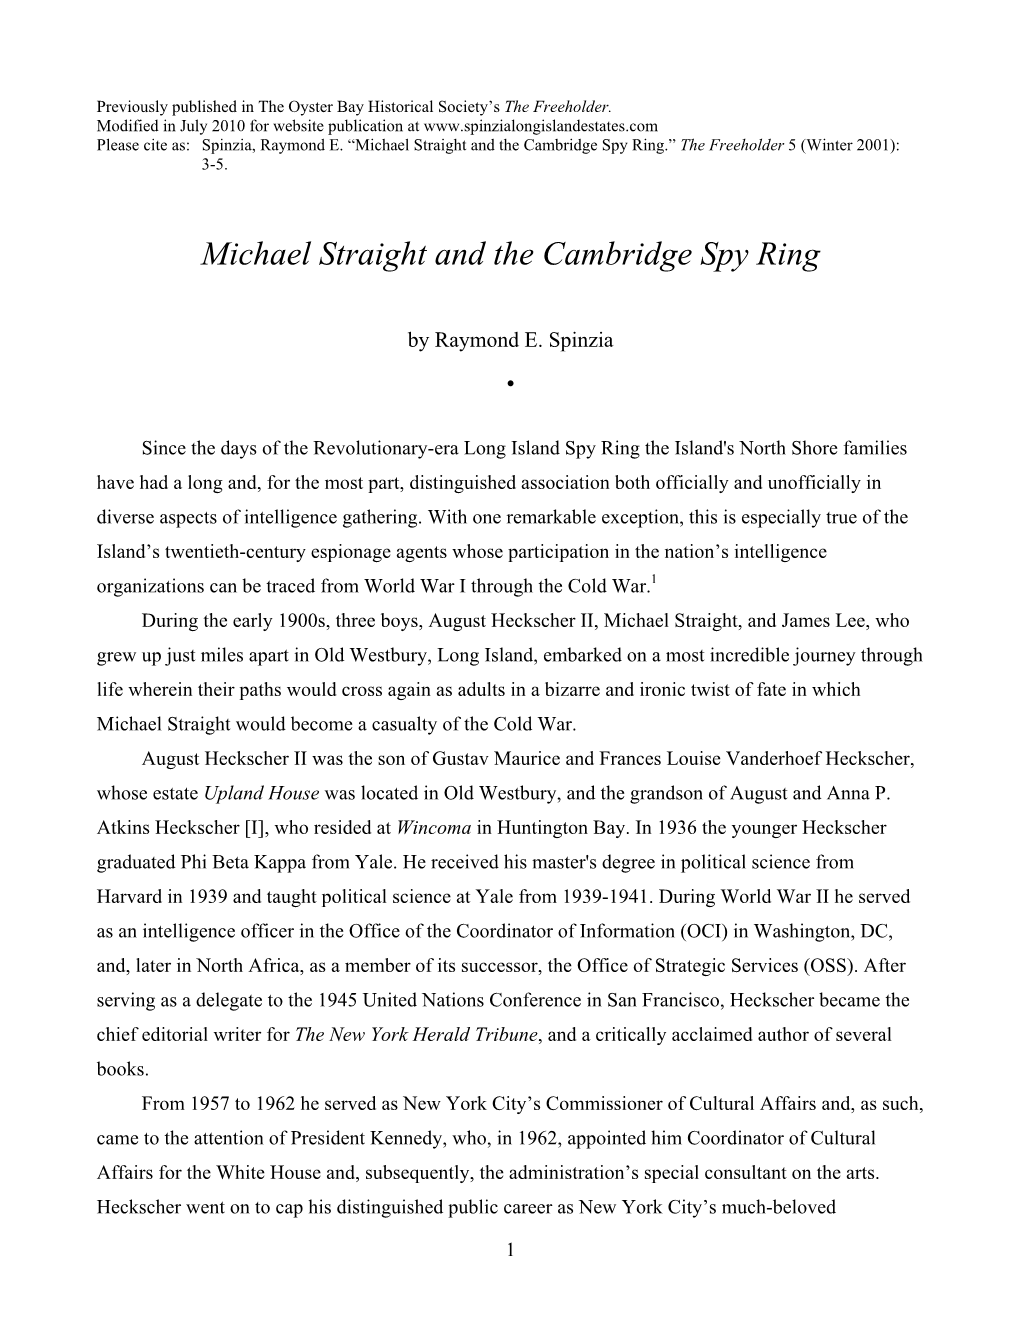 Michael Straight and the Cambridge Spy Ring.” the Freeholder 5 (Winter 2001): 3-5